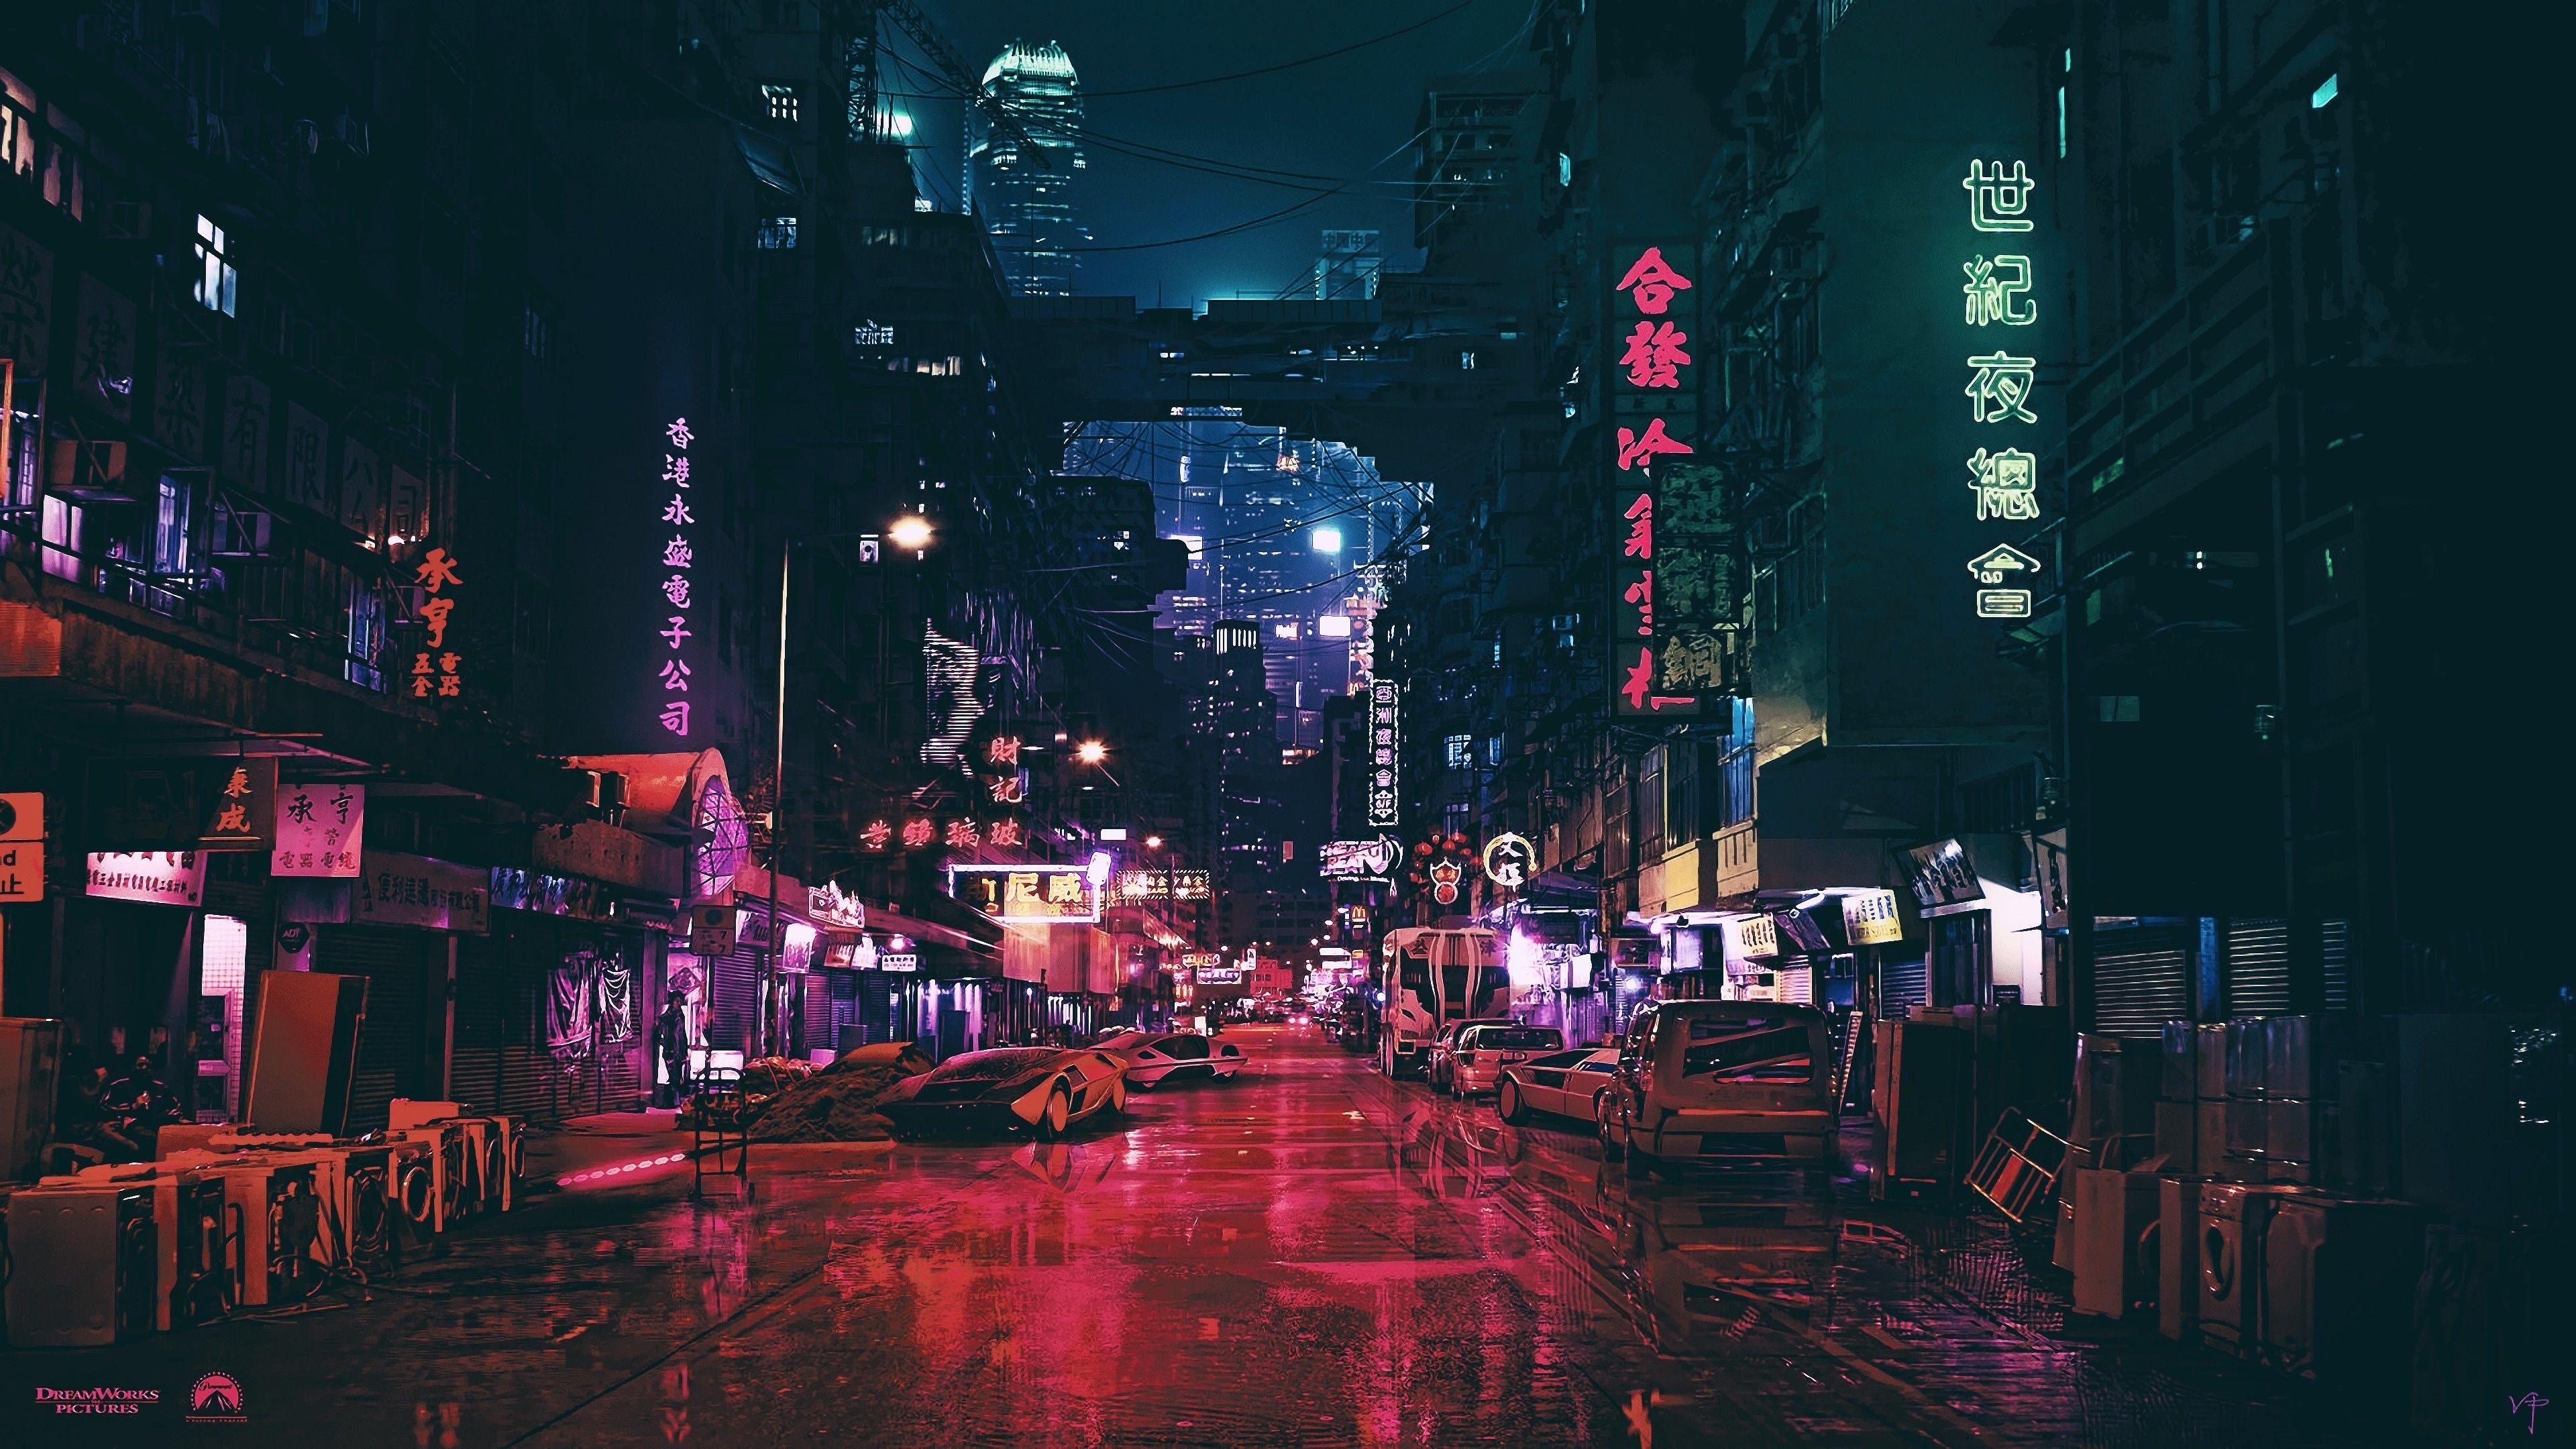 Ghost In The Shell City Wallpapers Top Free Ghost In The Shell Images, Photos, Reviews